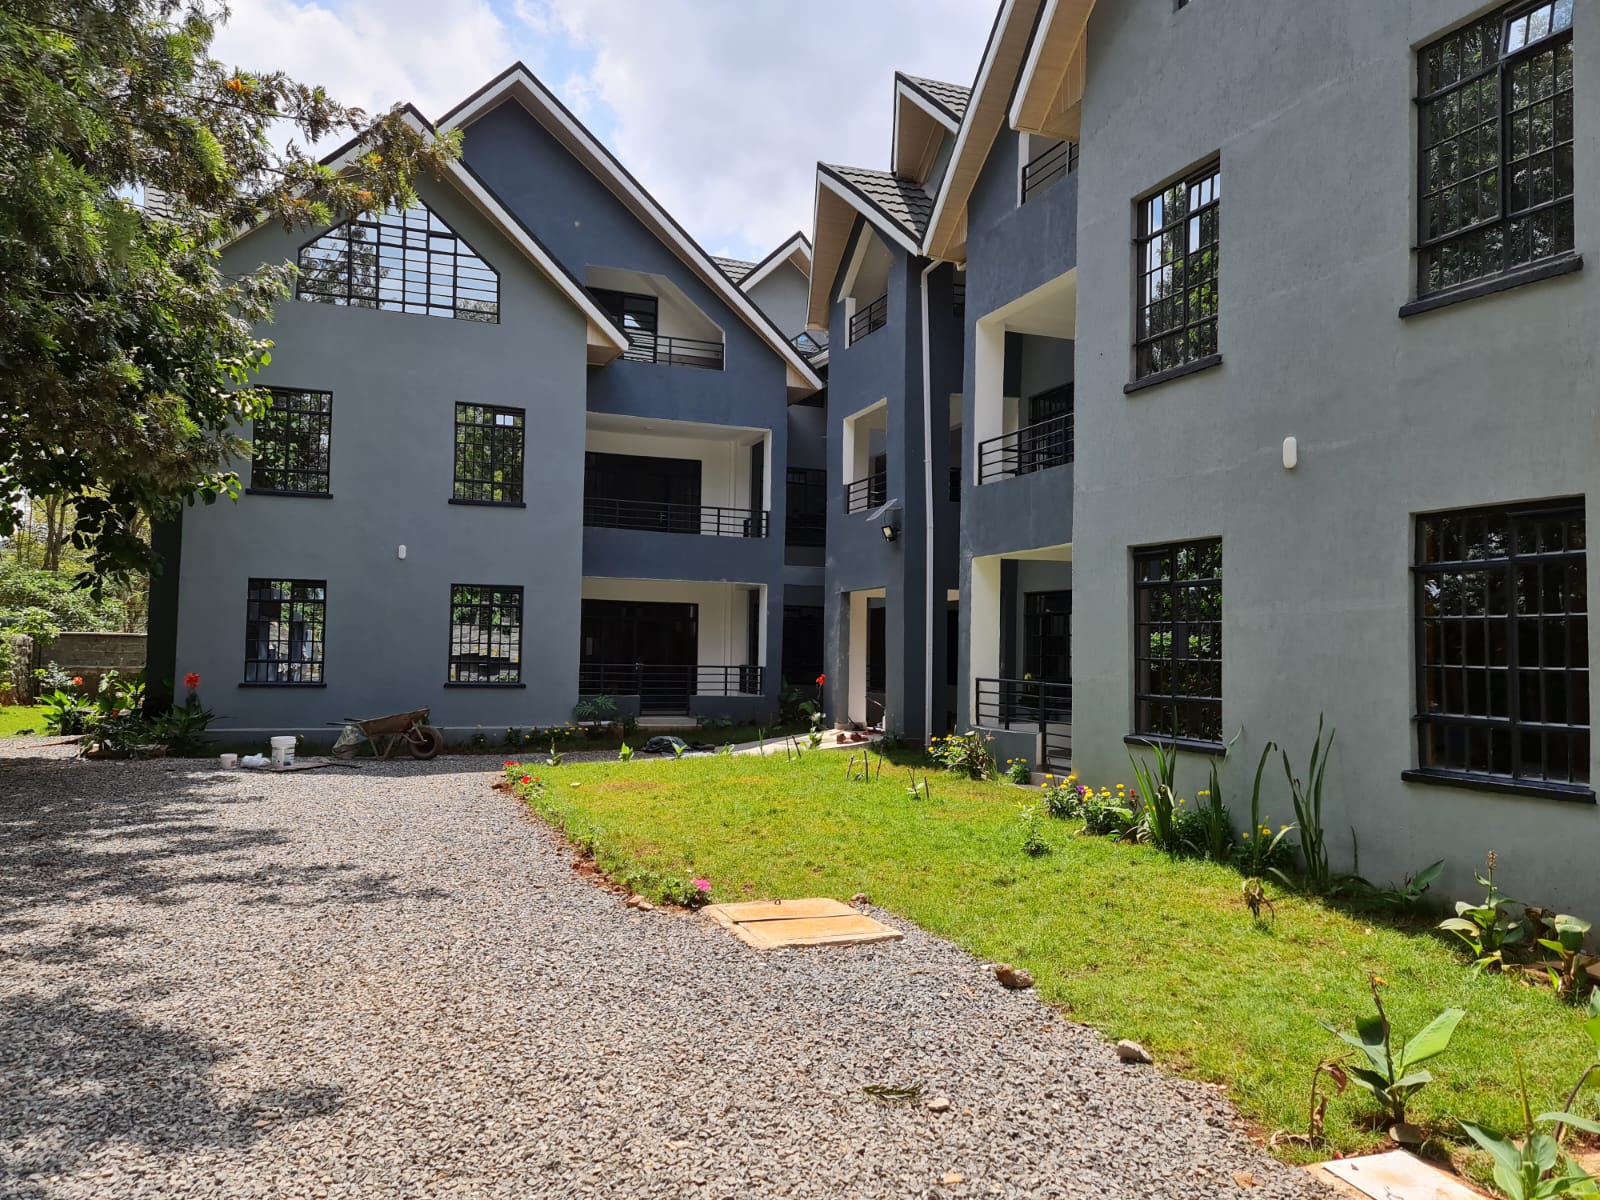 New 3 Bedroom Unfurnished House in Karen with Great Finish and Great views for rent at Ksh135k